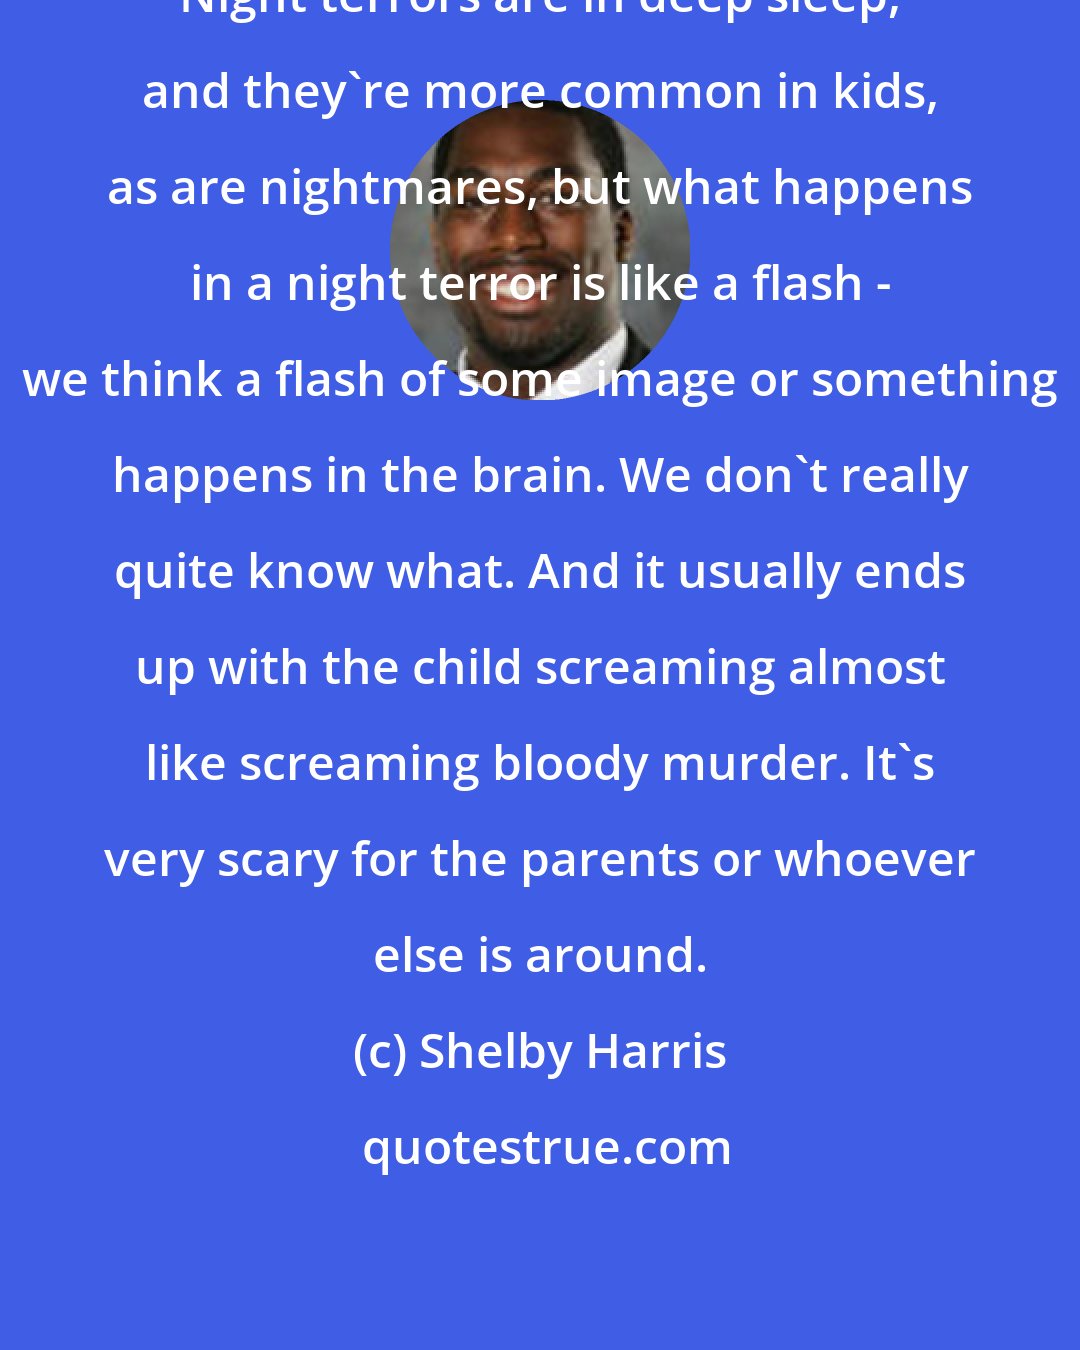 Shelby Harris: Night terrors are in deep sleep, and they're more common in kids, as are nightmares, but what happens in a night terror is like a flash - we think a flash of some image or something happens in the brain. We don't really quite know what. And it usually ends up with the child screaming almost like screaming bloody murder. It's very scary for the parents or whoever else is around.